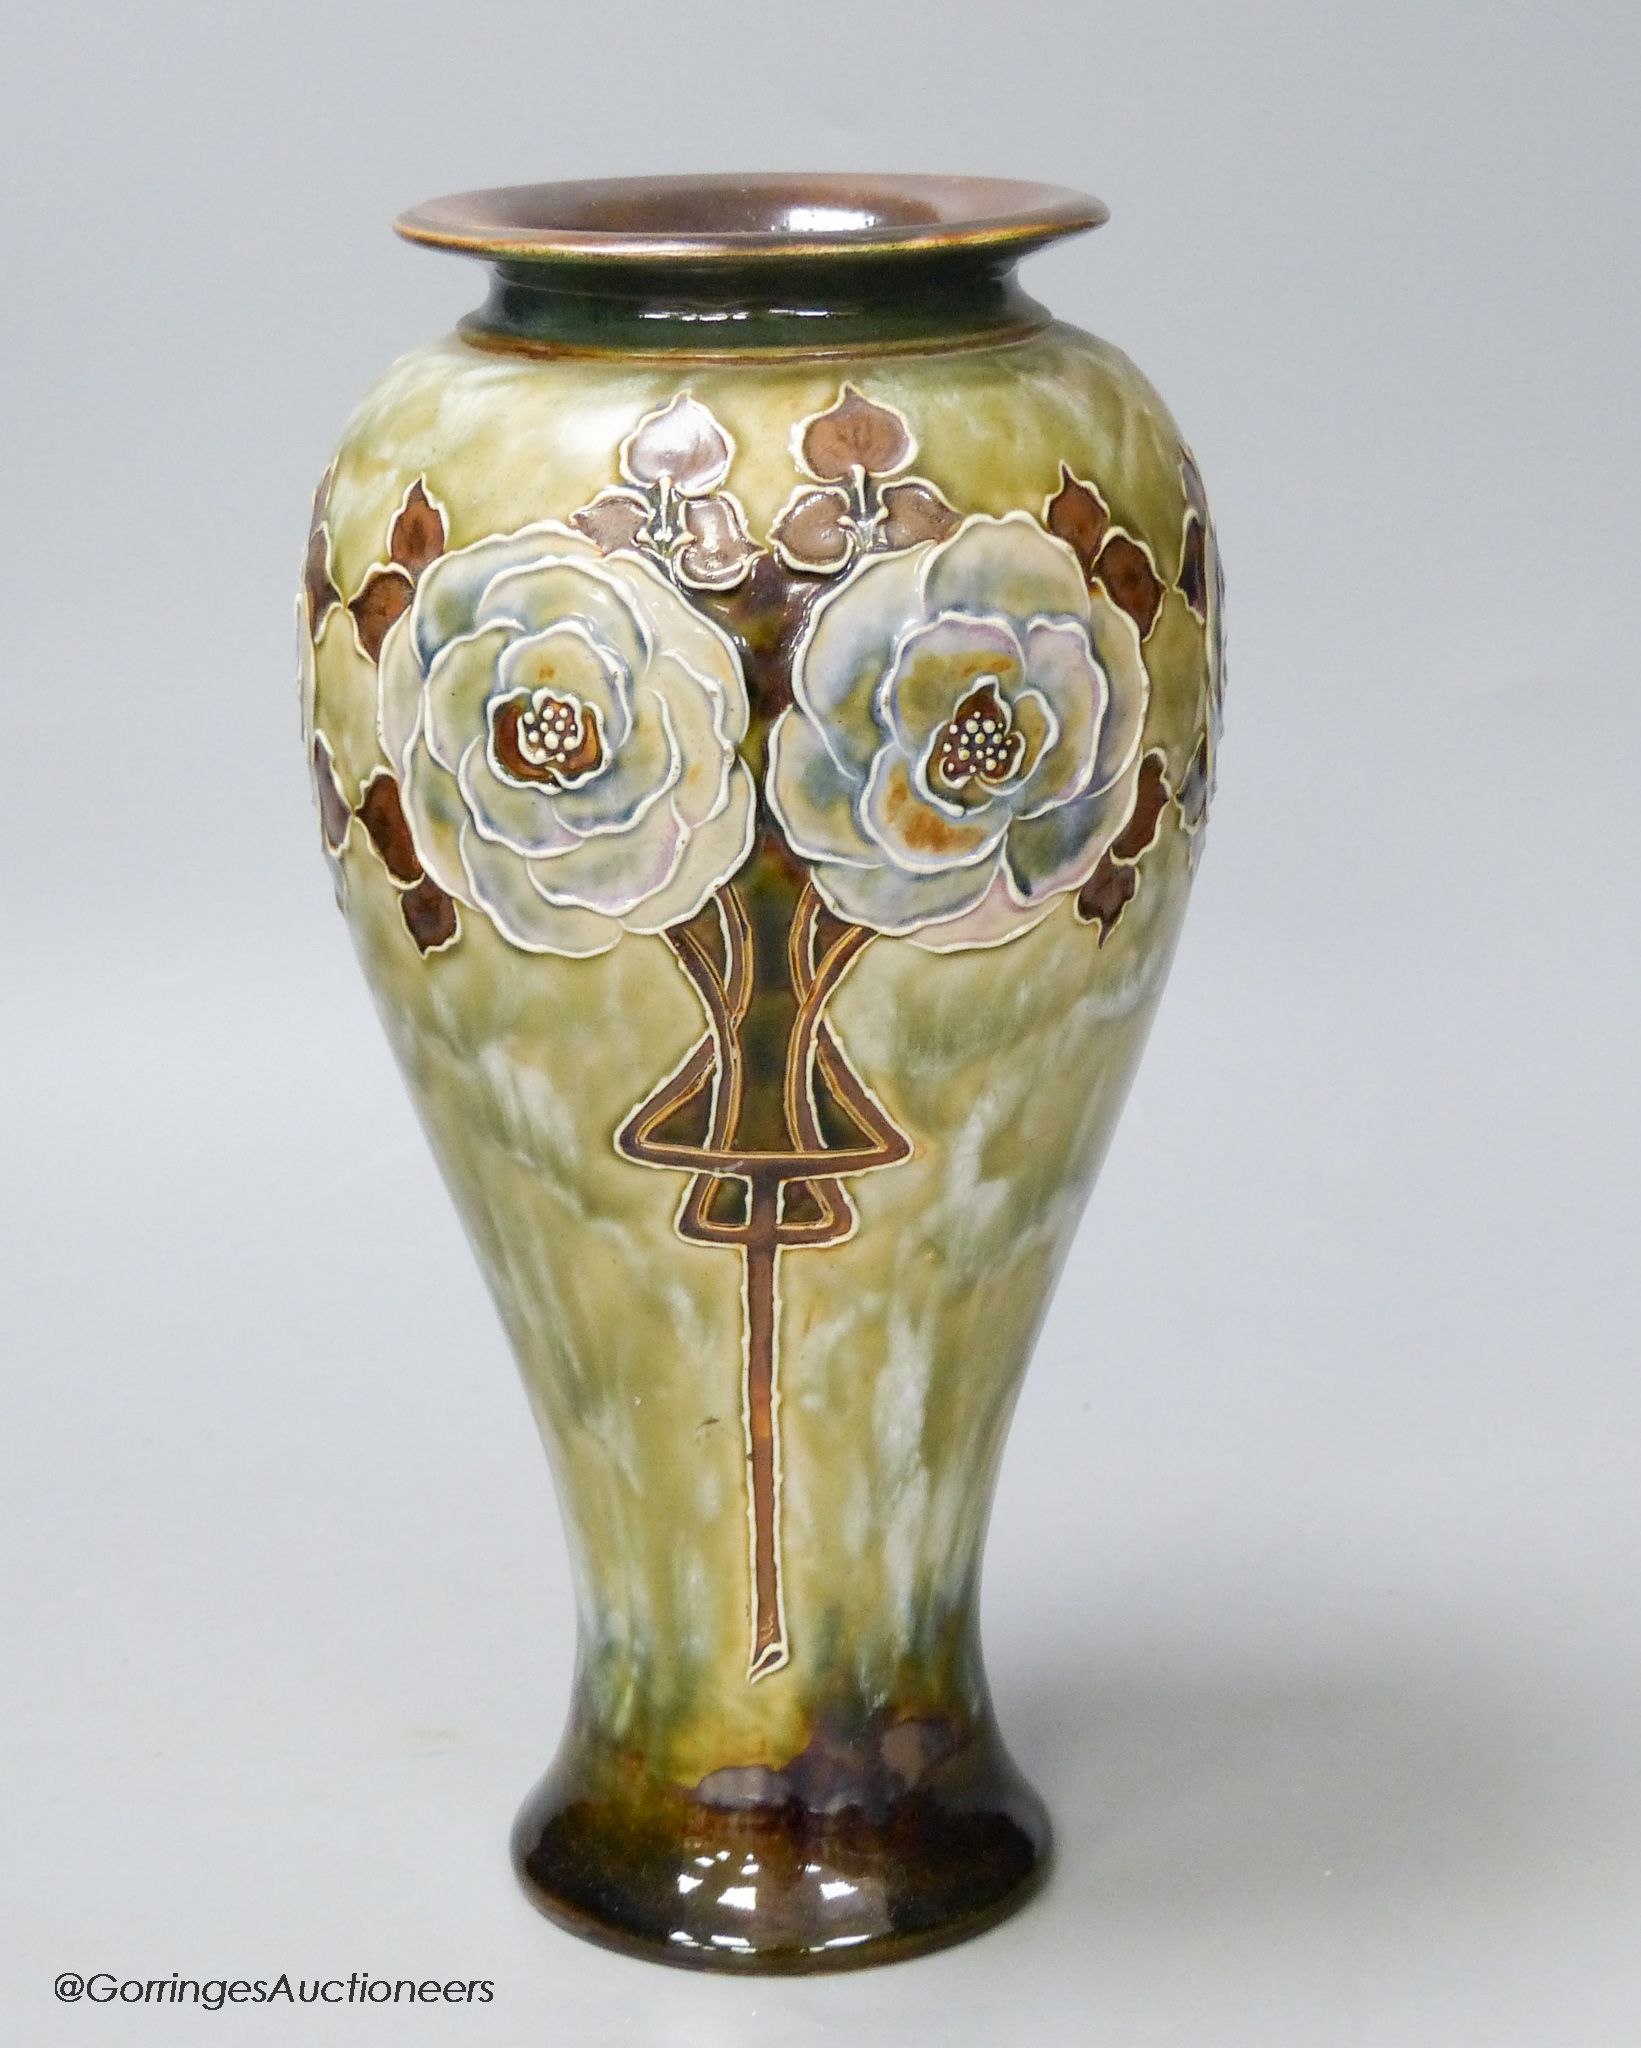 A Royal Doulton stoneware vase decorated with white roses by Eliza Simmance